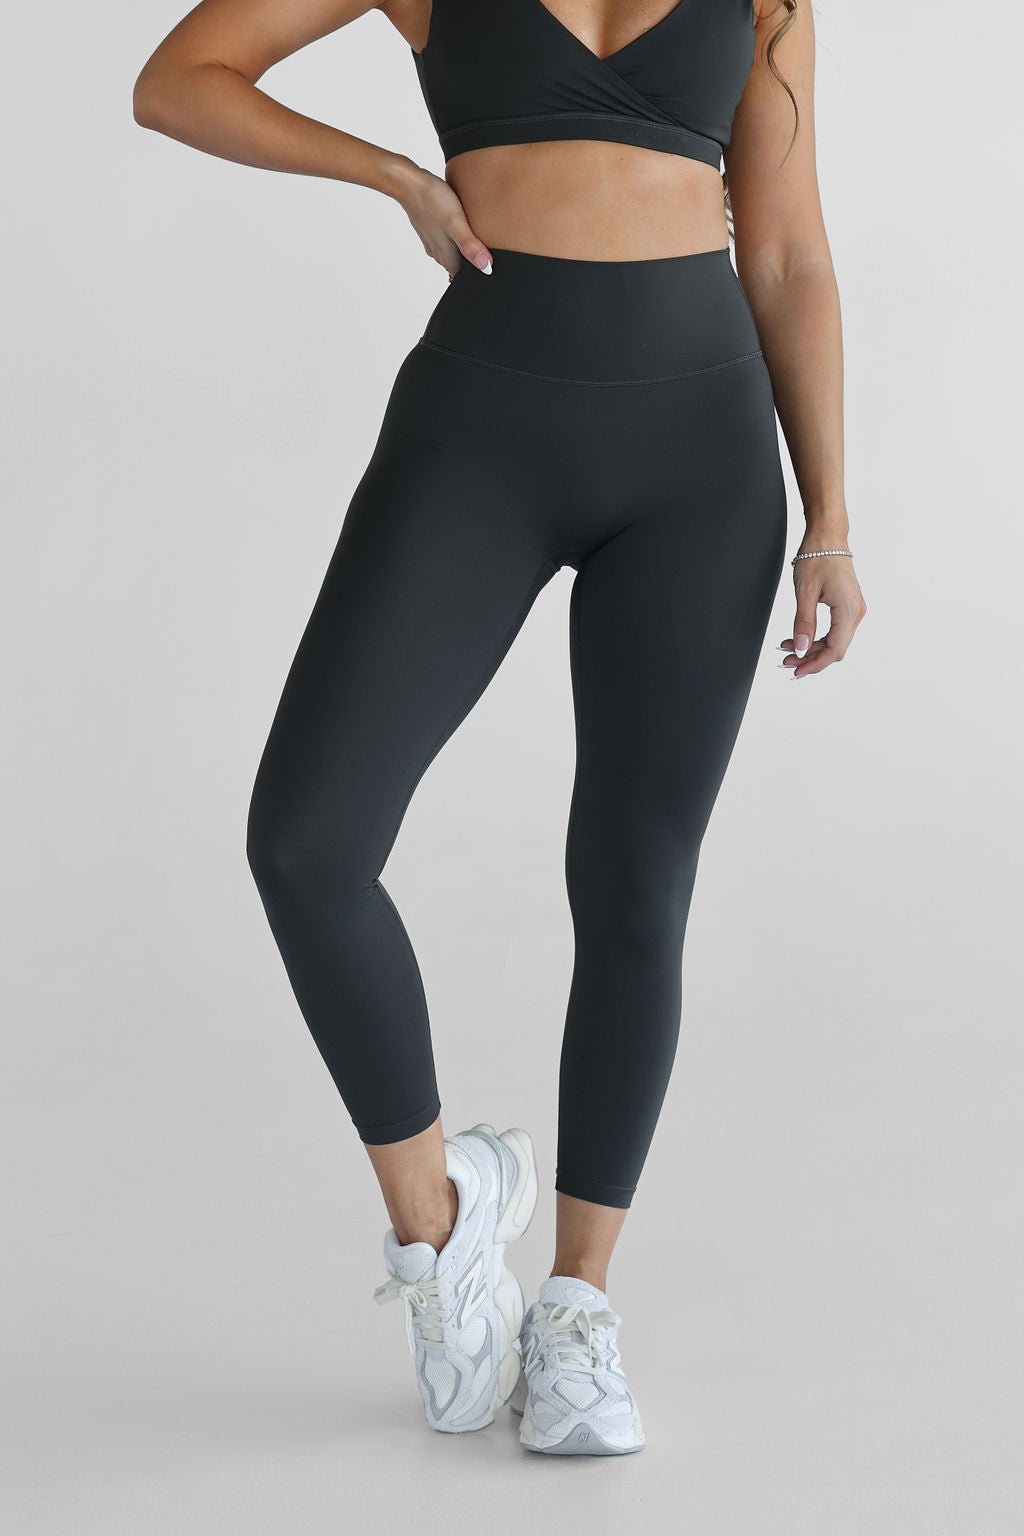 NWT Vie Active Rockell 7/8 Leggings in Black Camo Brushed Sculpt